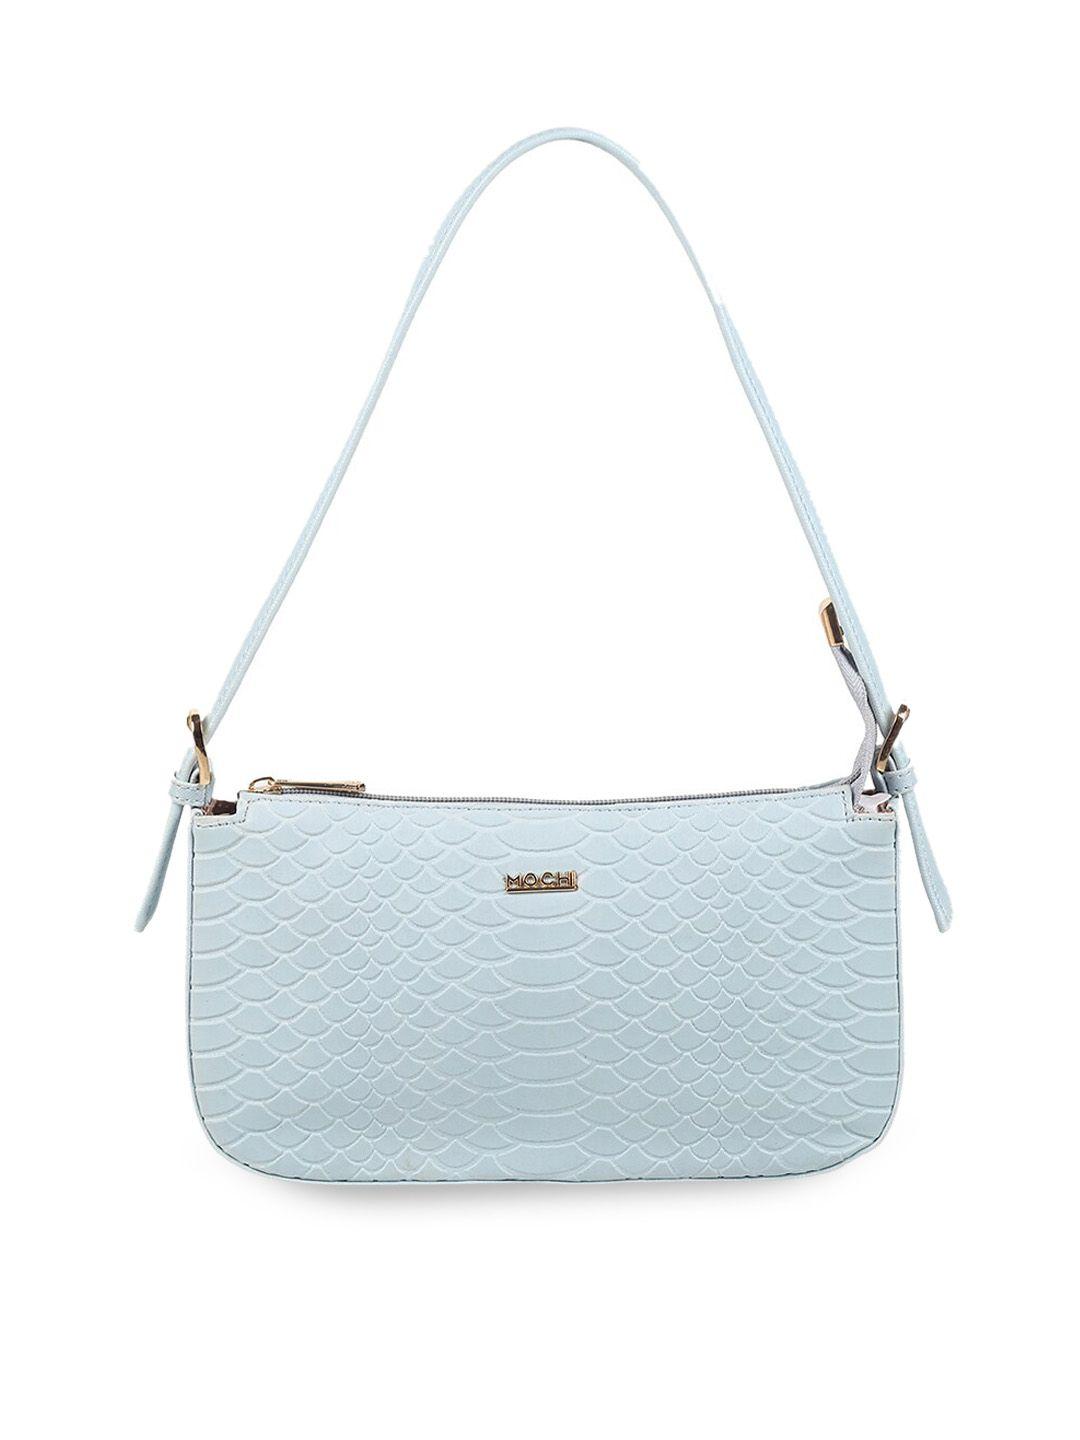 mochi blue textured swagger hobo bag